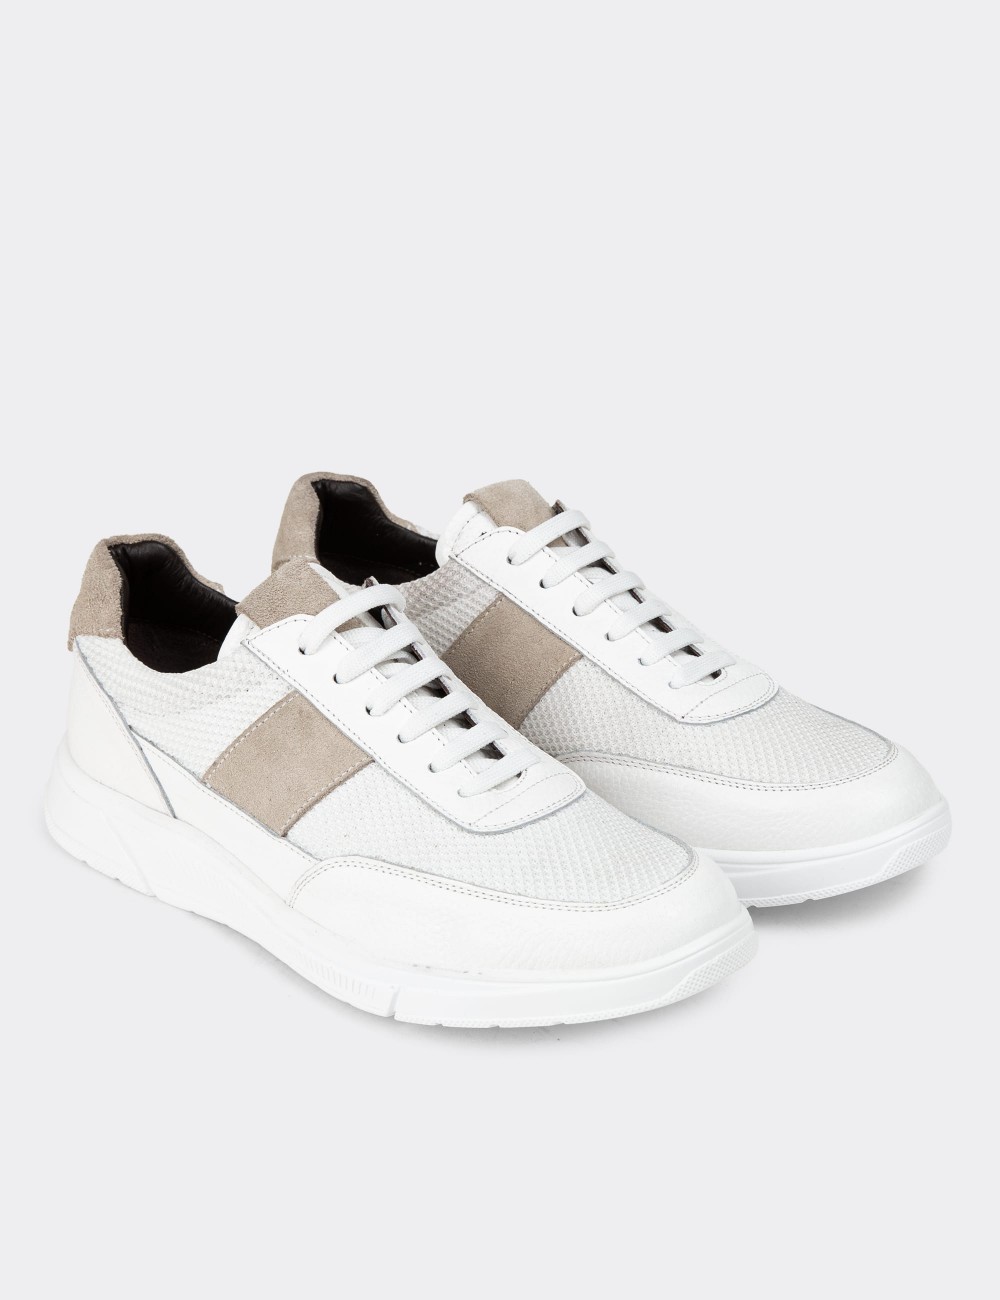 White Leather Sneakers - 01963MBYZC01